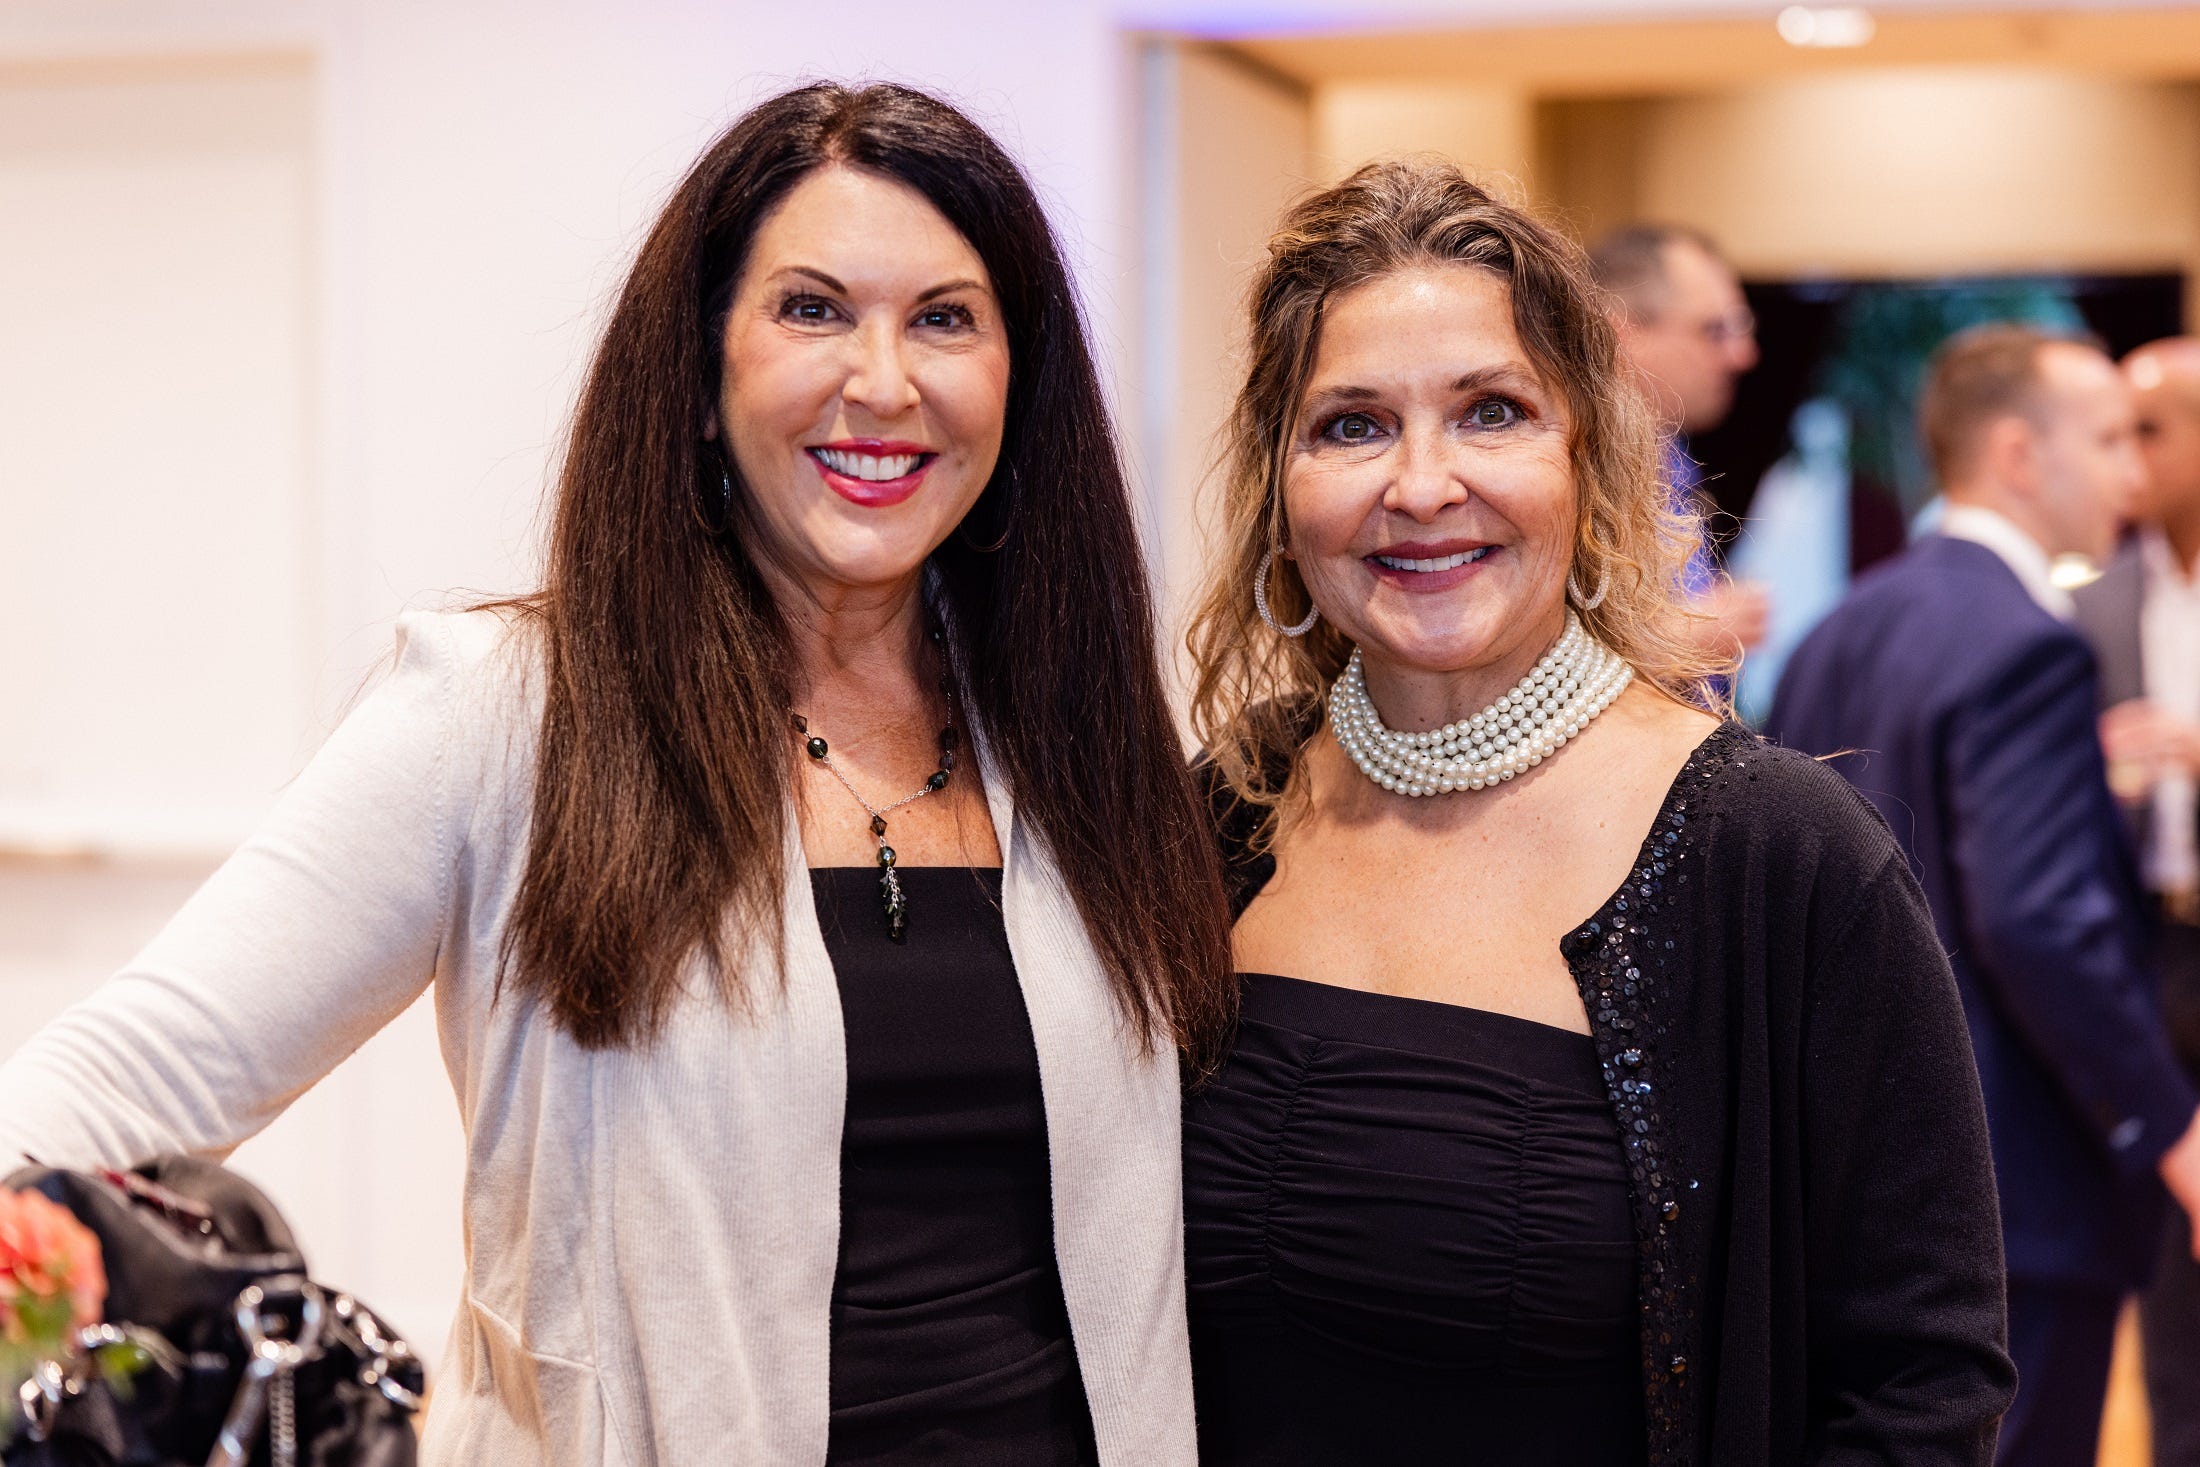 Kathy Peters and Tamara Willimott at the Netcare Foundation’s annual Community Awards & Recognition Dinner, held Oct. 18, 2023, at the Columbus Museum of Art